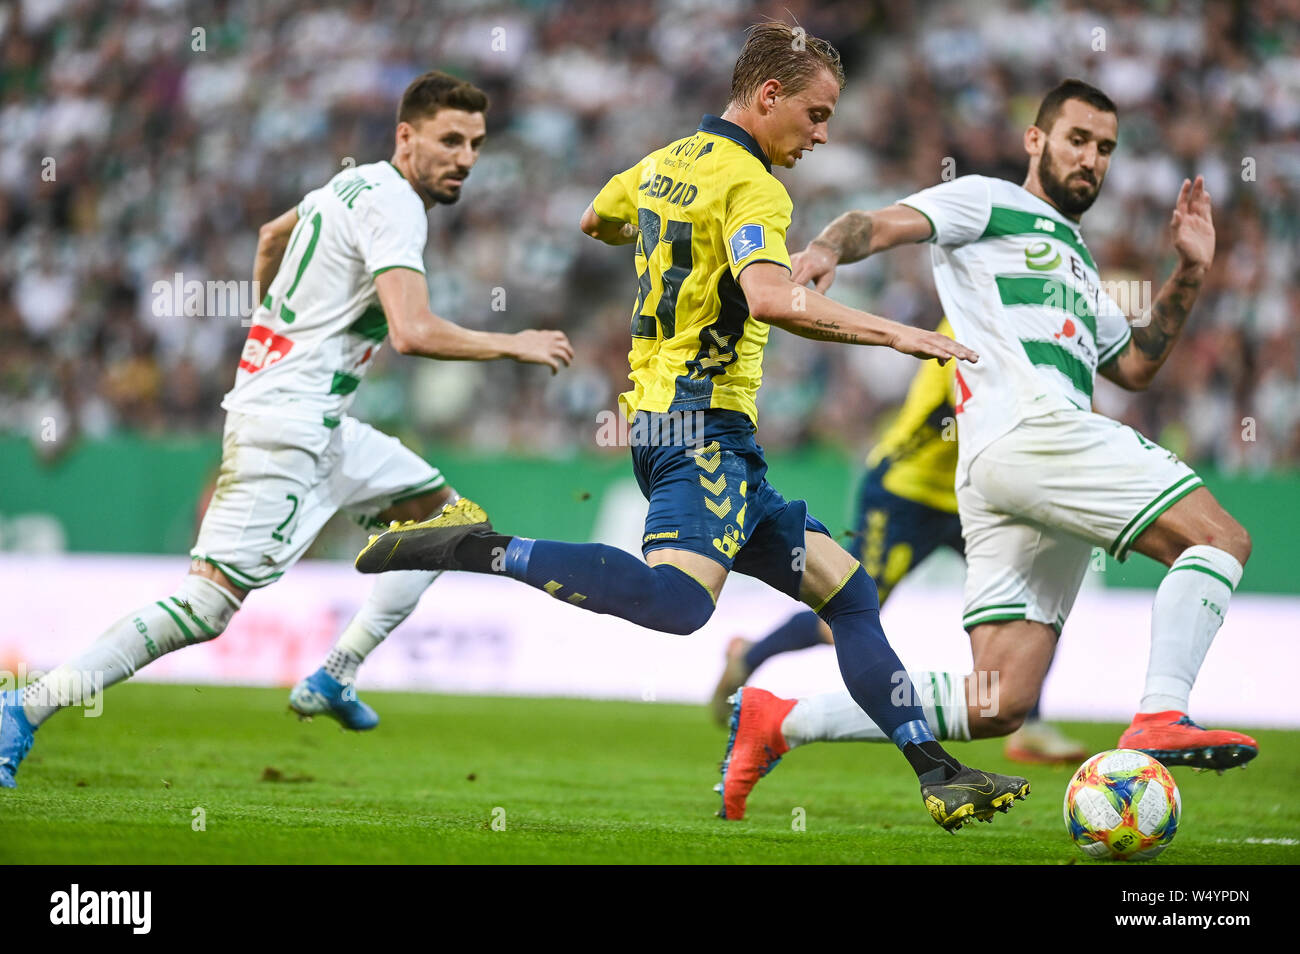 Filip Mladenovic from Lechia Gdansk (L) Simon Hedlund from Brondby IF (C) and Blazej Augustyn from Lechia Gdansk (R) are seen in action during the UEFA Europa League Qualifiers match between Lechia Gdansk and Brondby IF at Energa Stadium.(Final score; Lechia Gdansk 2:1 Brondby IF) Stock Photo